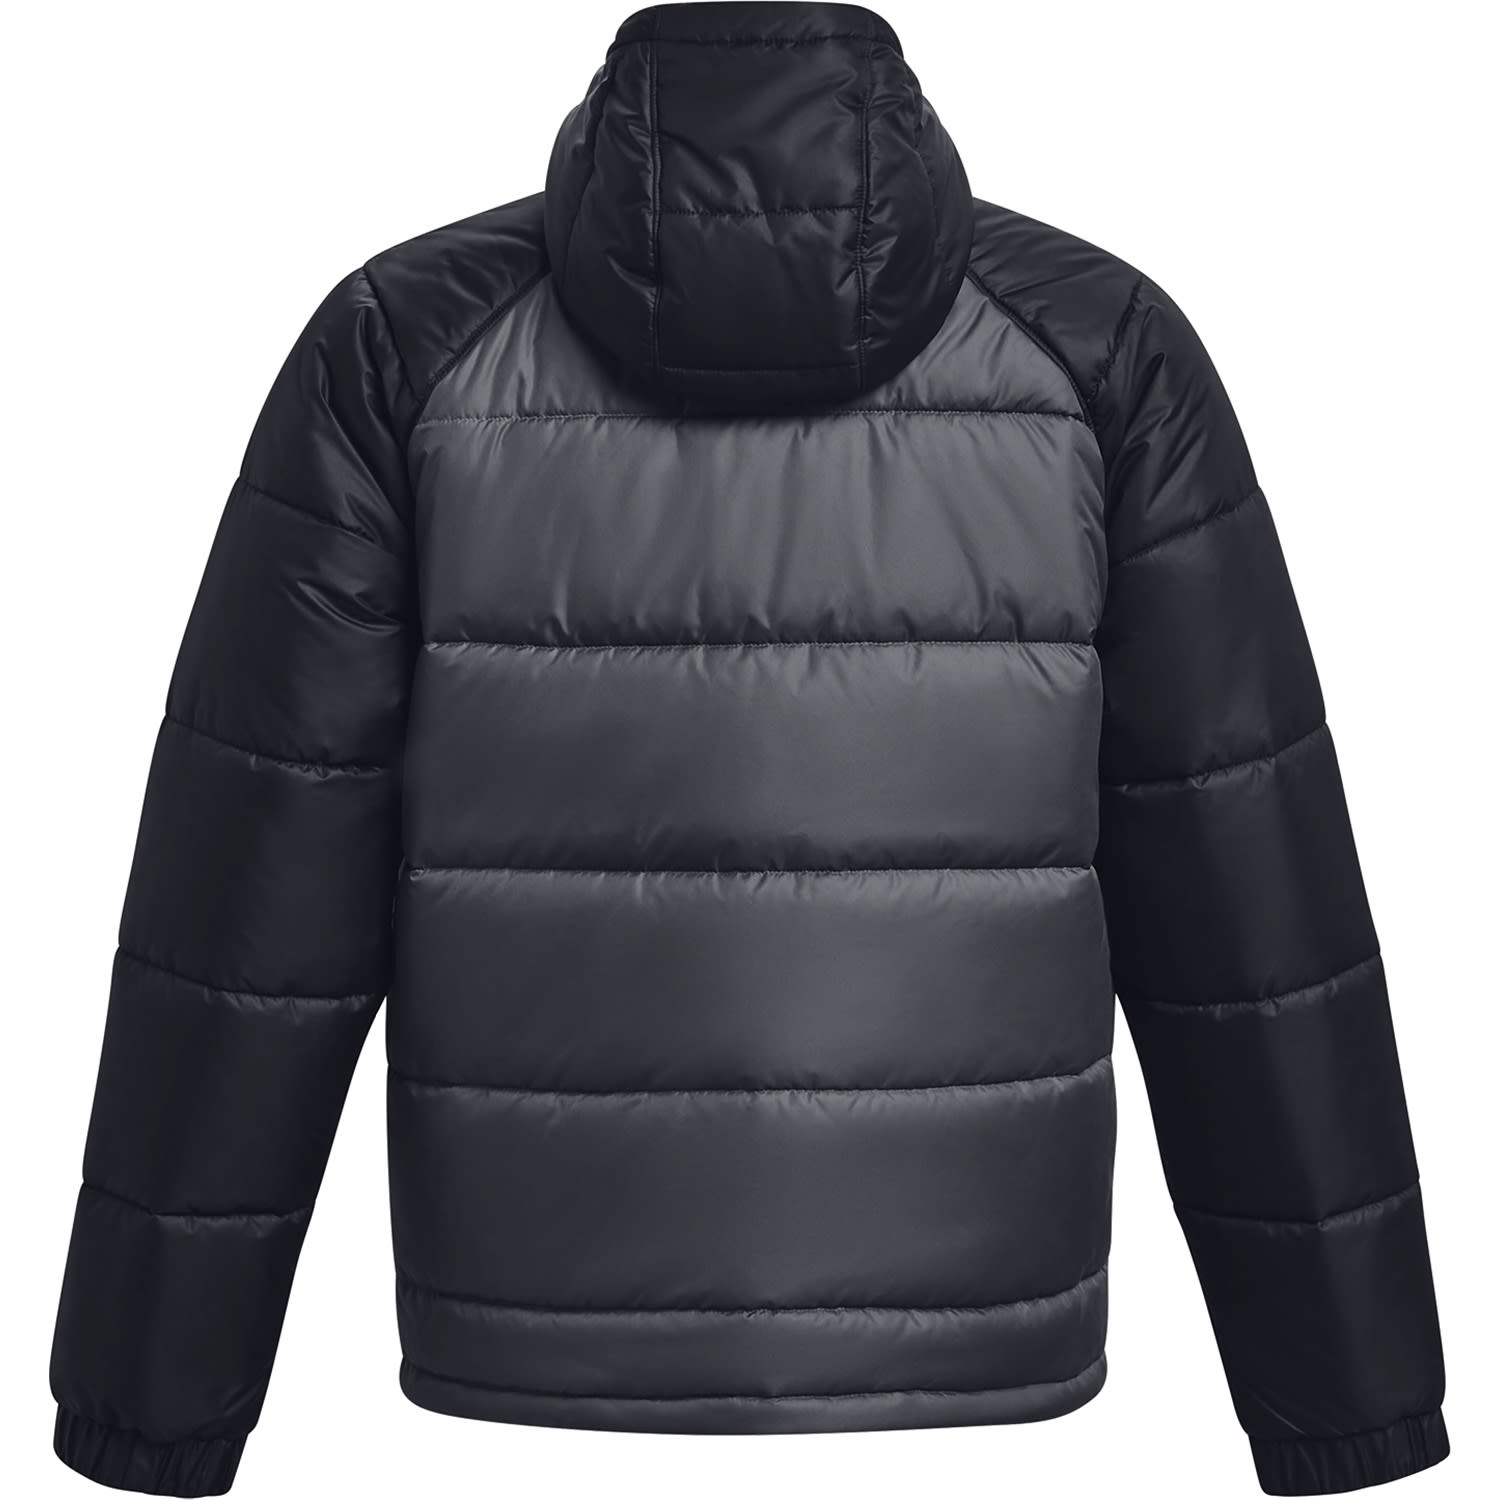 Under Armour® Men’s Storm Insulated Hooded Jacket